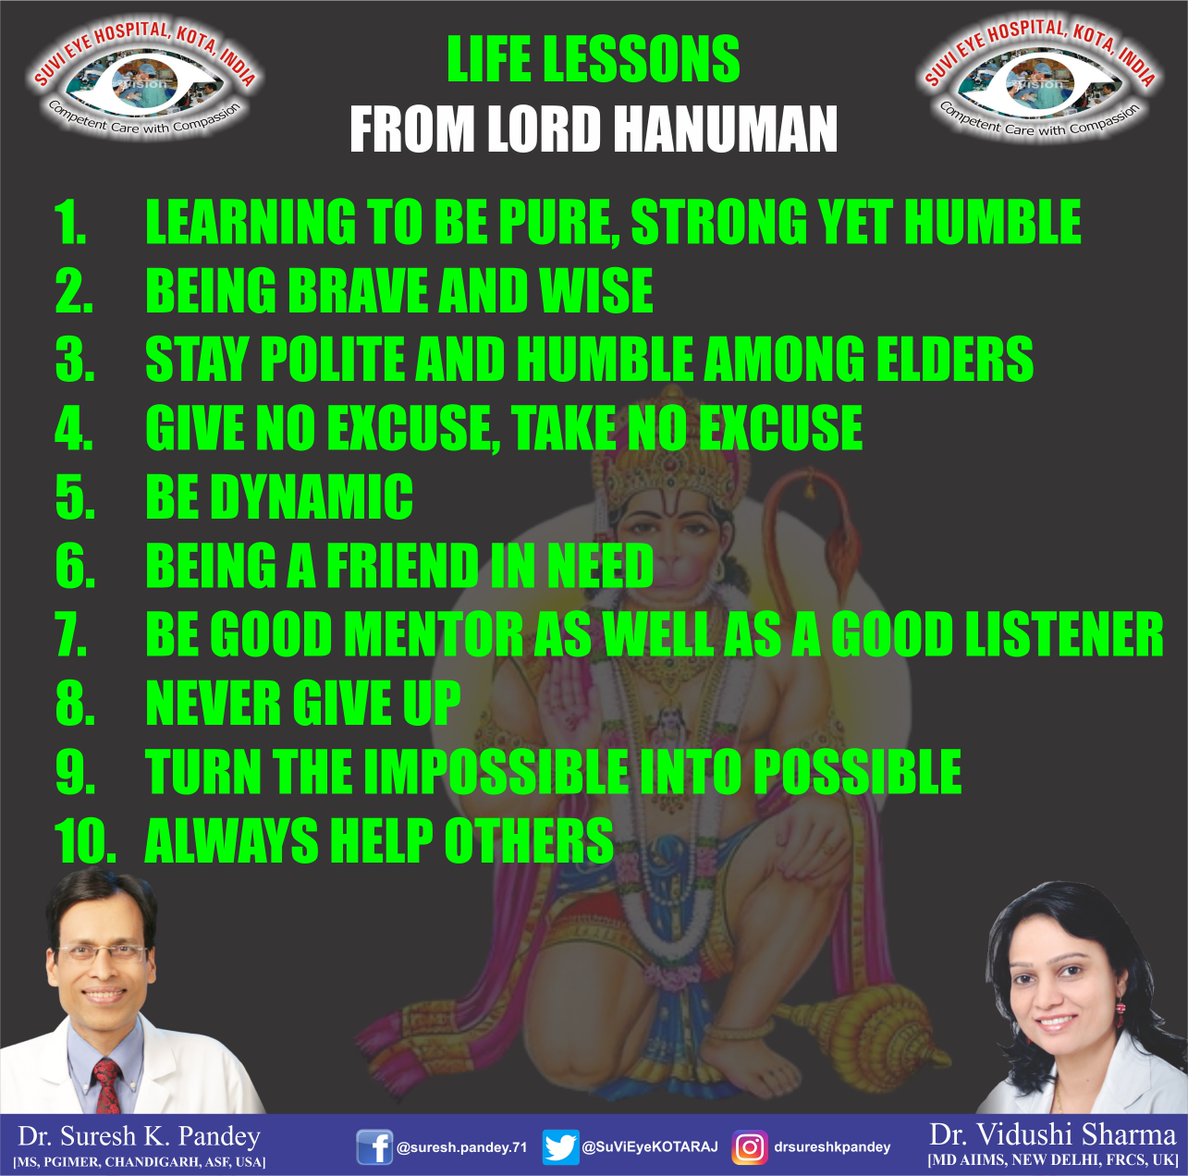 LIFE LESSONS FROM LORD HANUMAN

1. LEARNING TO BE PURE, STRONG YET HUMBLE
2. BEING BRAVE AND WISE
3. STAY POLITE AND HUMBLE AMONG ELDERS
4. GIVE NO EXCUSE, TAKE NO EXCUSE
5. BE DYNAMIC

#DrSureshKPandey
#DrVidushiSharmaKota
#SuViEyeHospitalKota
#SuViEyeHospitalLasikLaserCenter